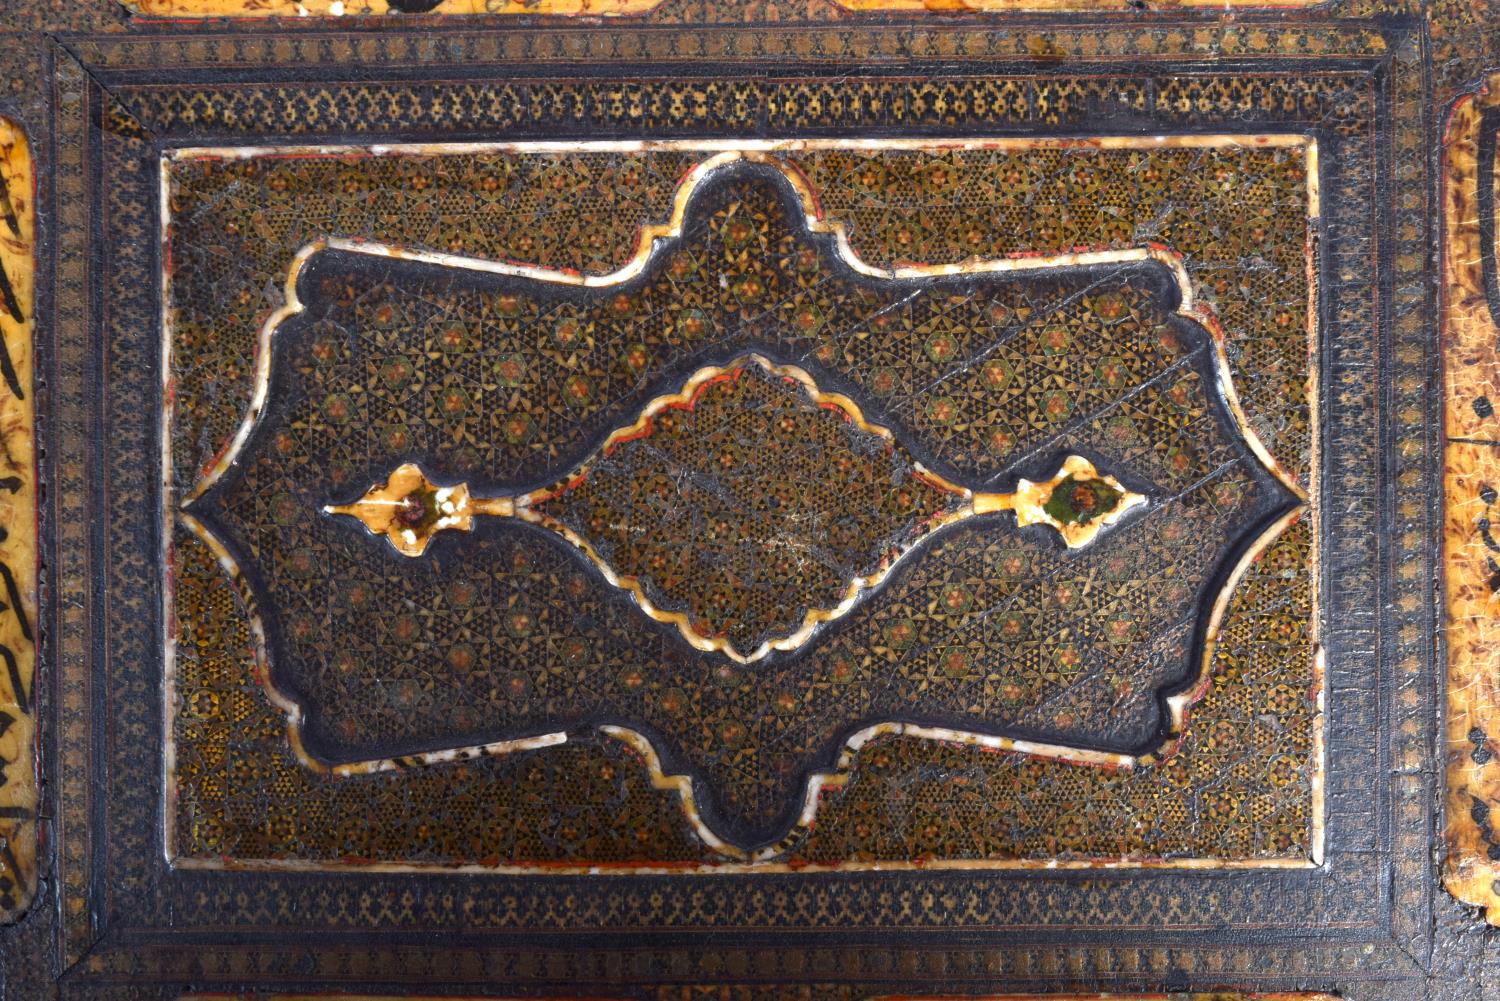 A RARE LARGE 18TH/19TH CENTURY MIDDLE EASTERN ISLAMIC MICRO MOSAIC BOX painted with Kufic script, fo - Image 6 of 8